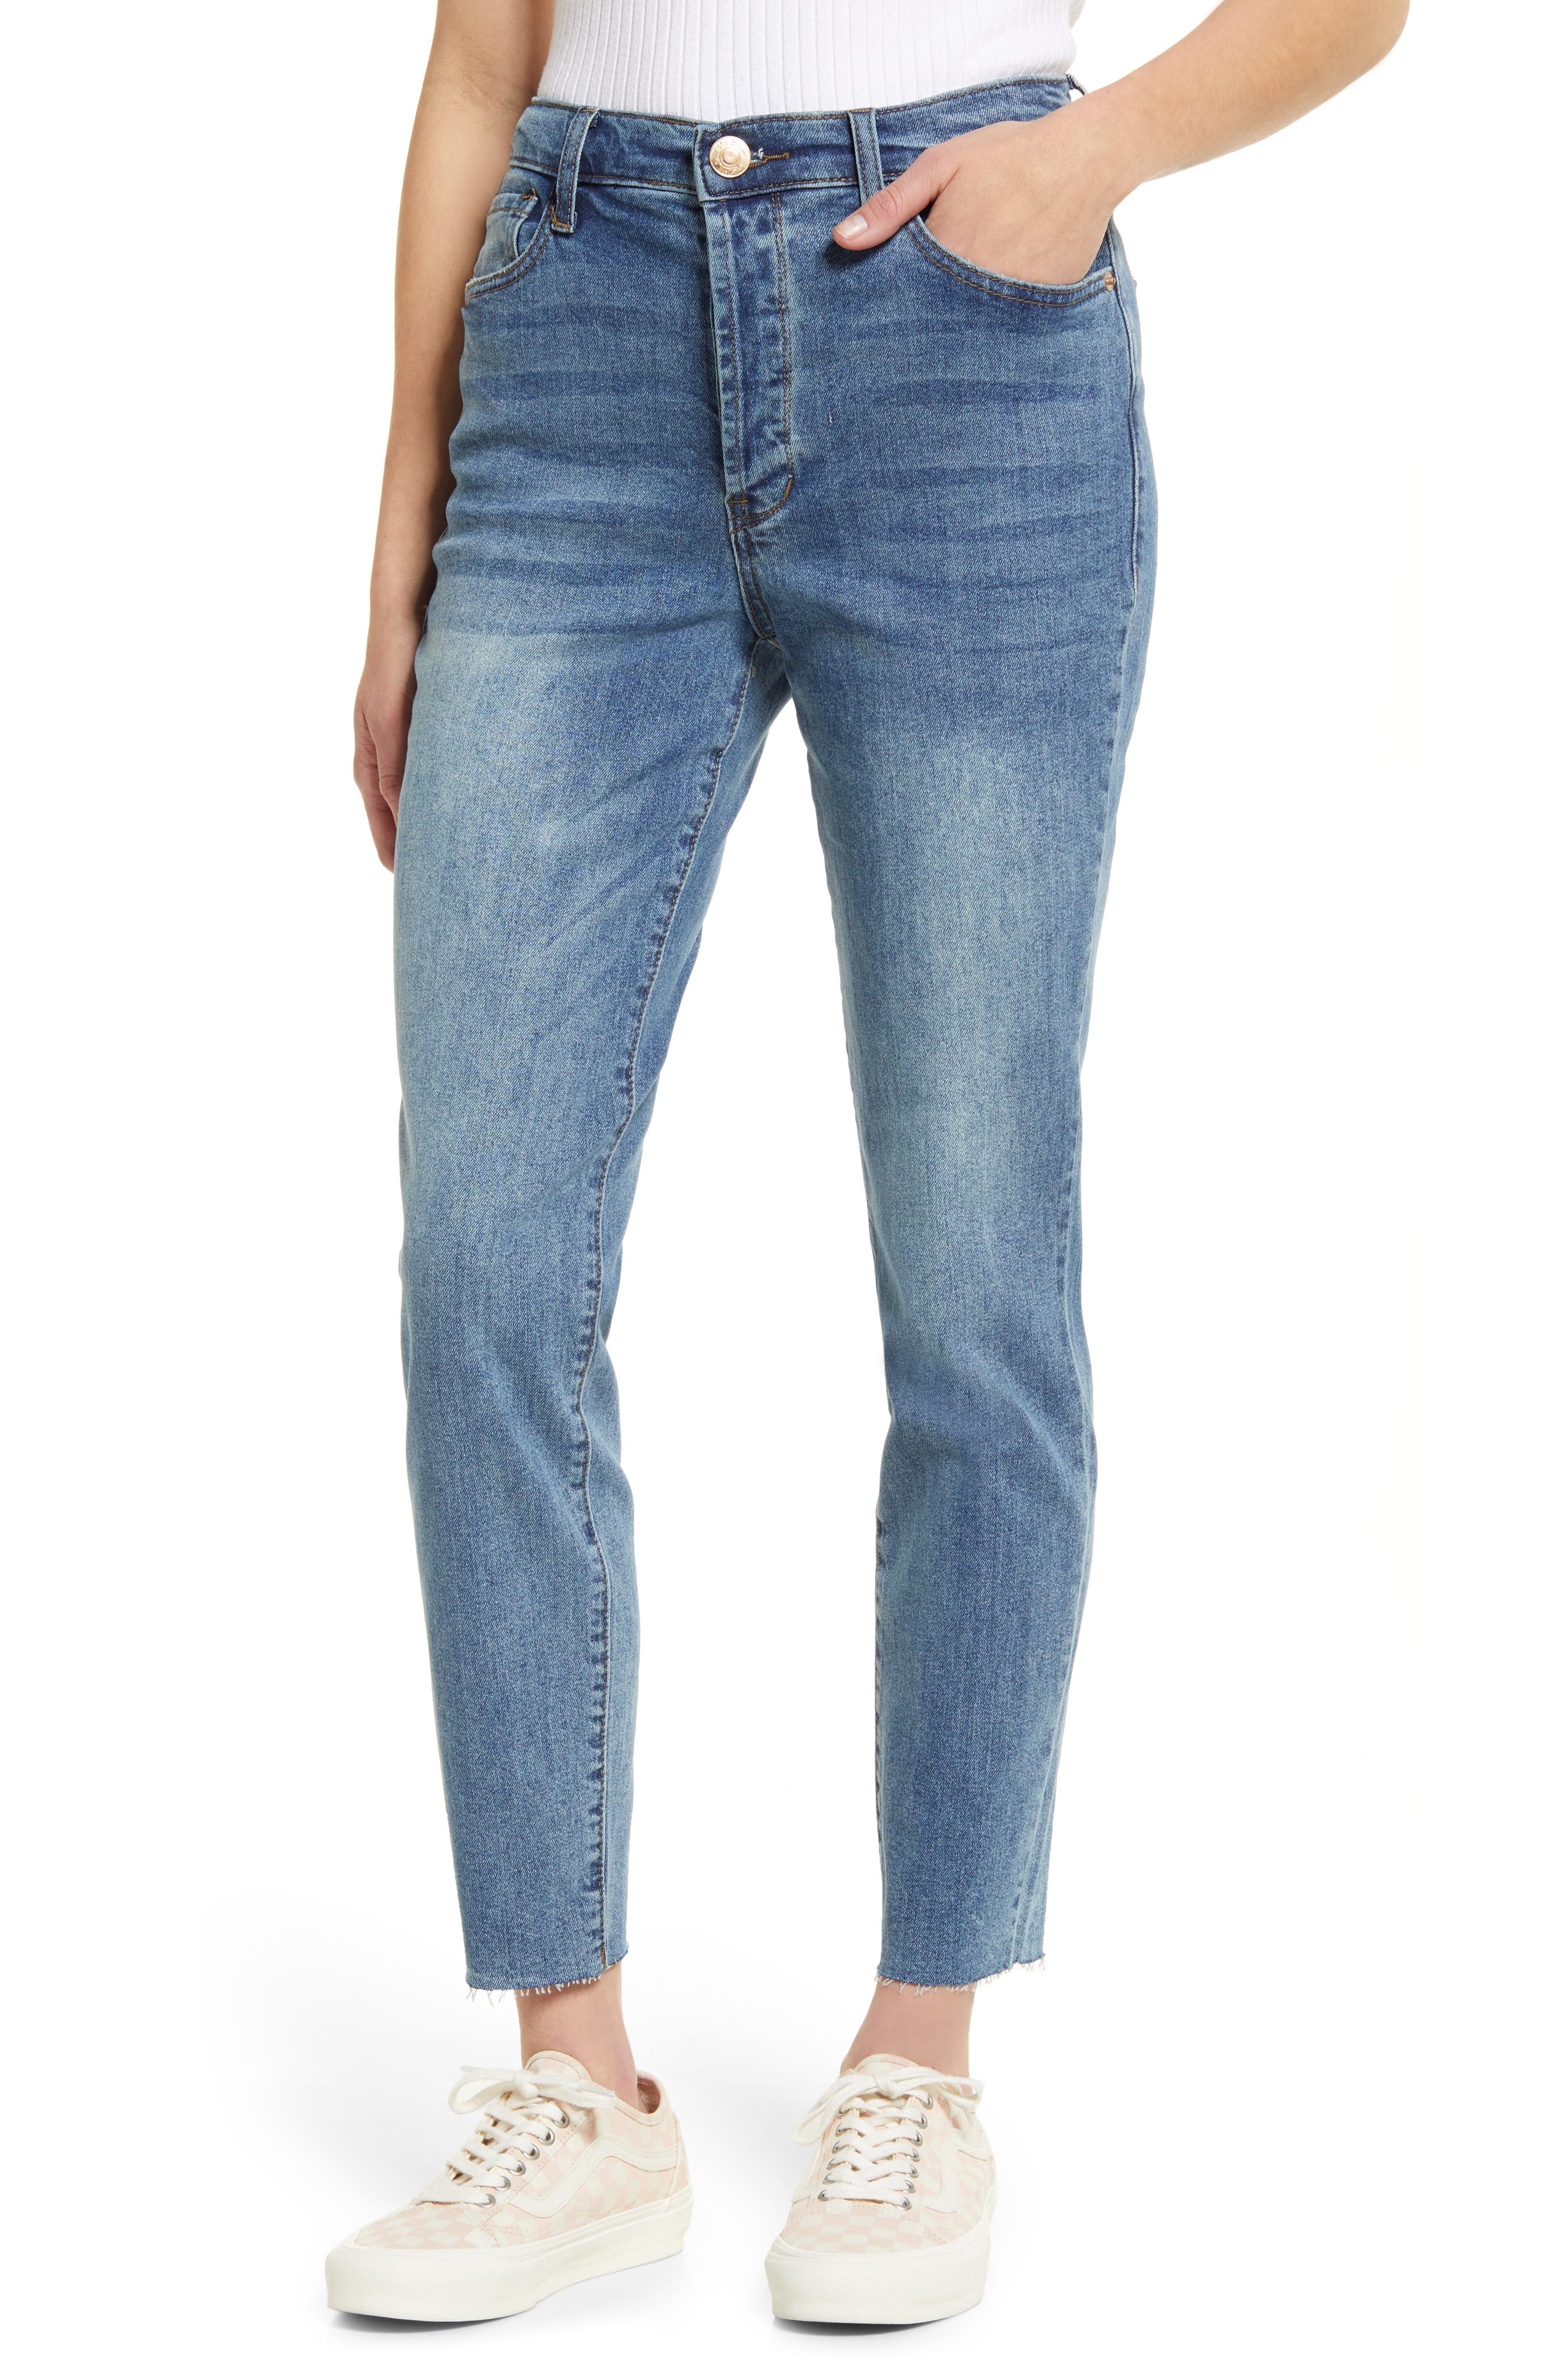 Christy High Waist Tapered Ankle Skinny Jeans STS BLUE